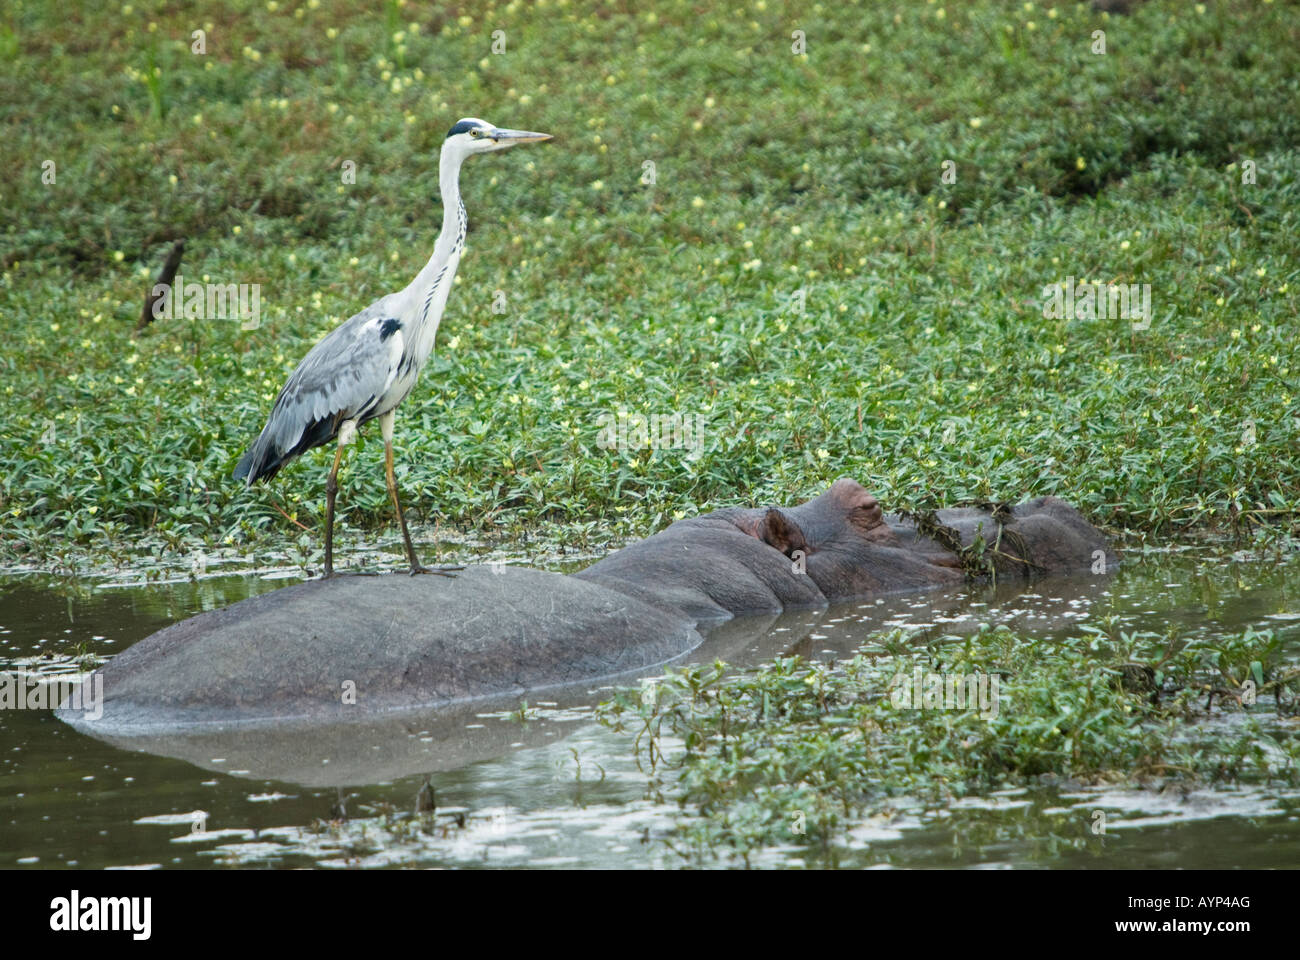 A grey heron standing on top of a hippo, using it as a fishing platform Stock Photo